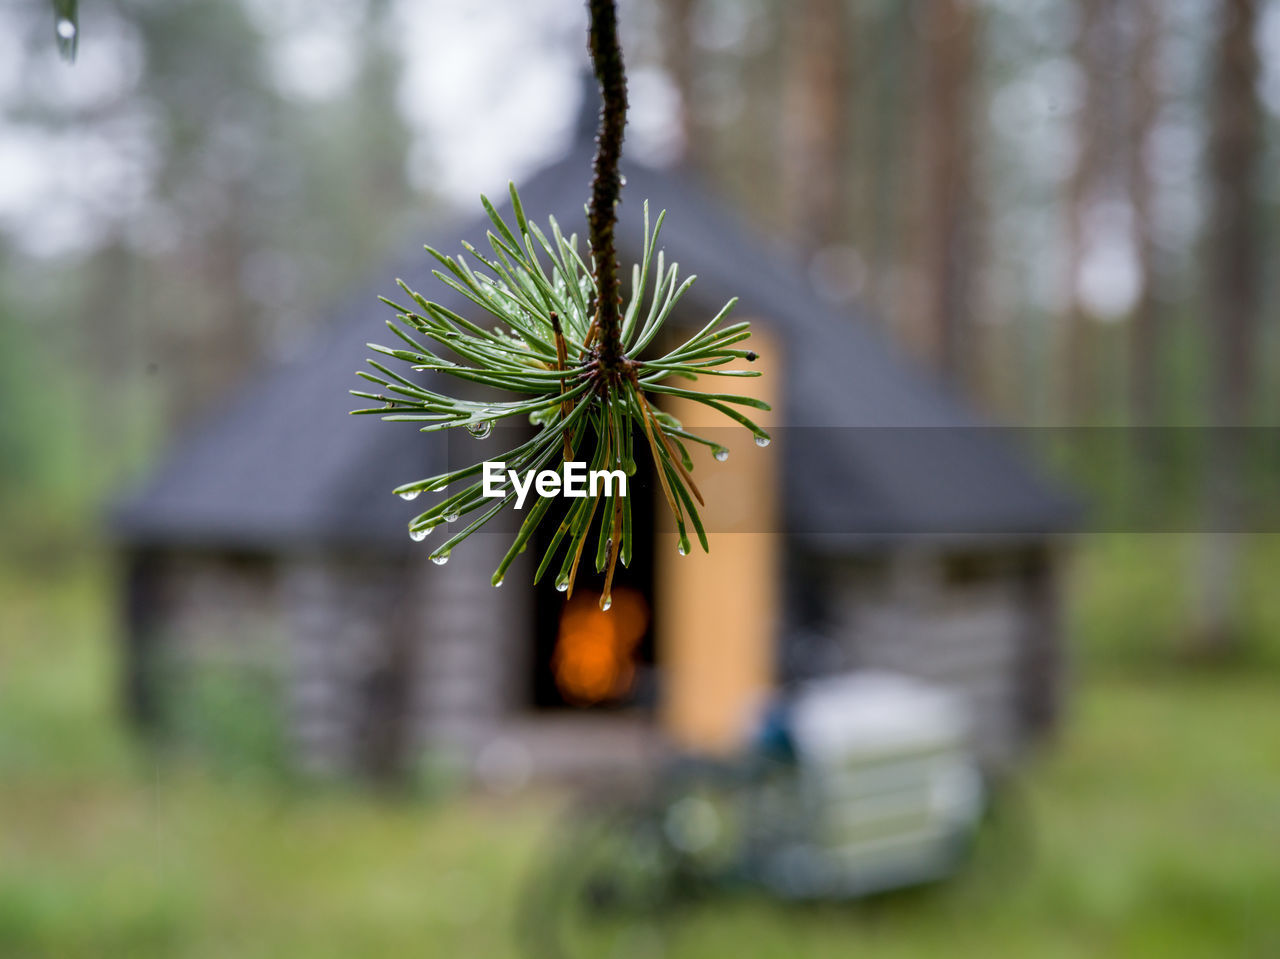 Water drops in foreground in front of small cabin and touring bicycle, finland